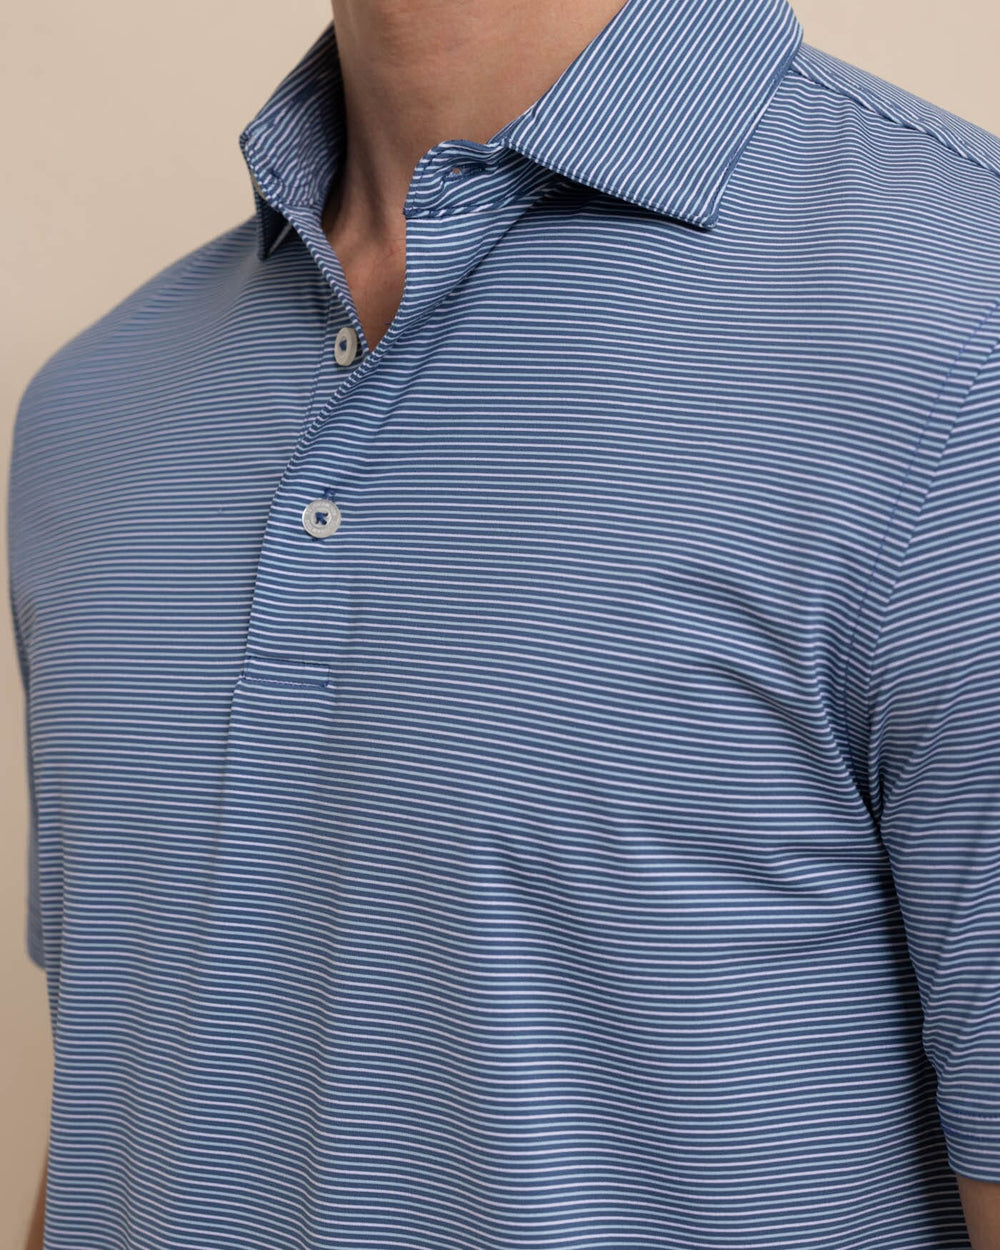 The detail view of the Southern Tide brrr-eeze Baytop Stripe Performance Polo by Southern Tide - Aged Denim